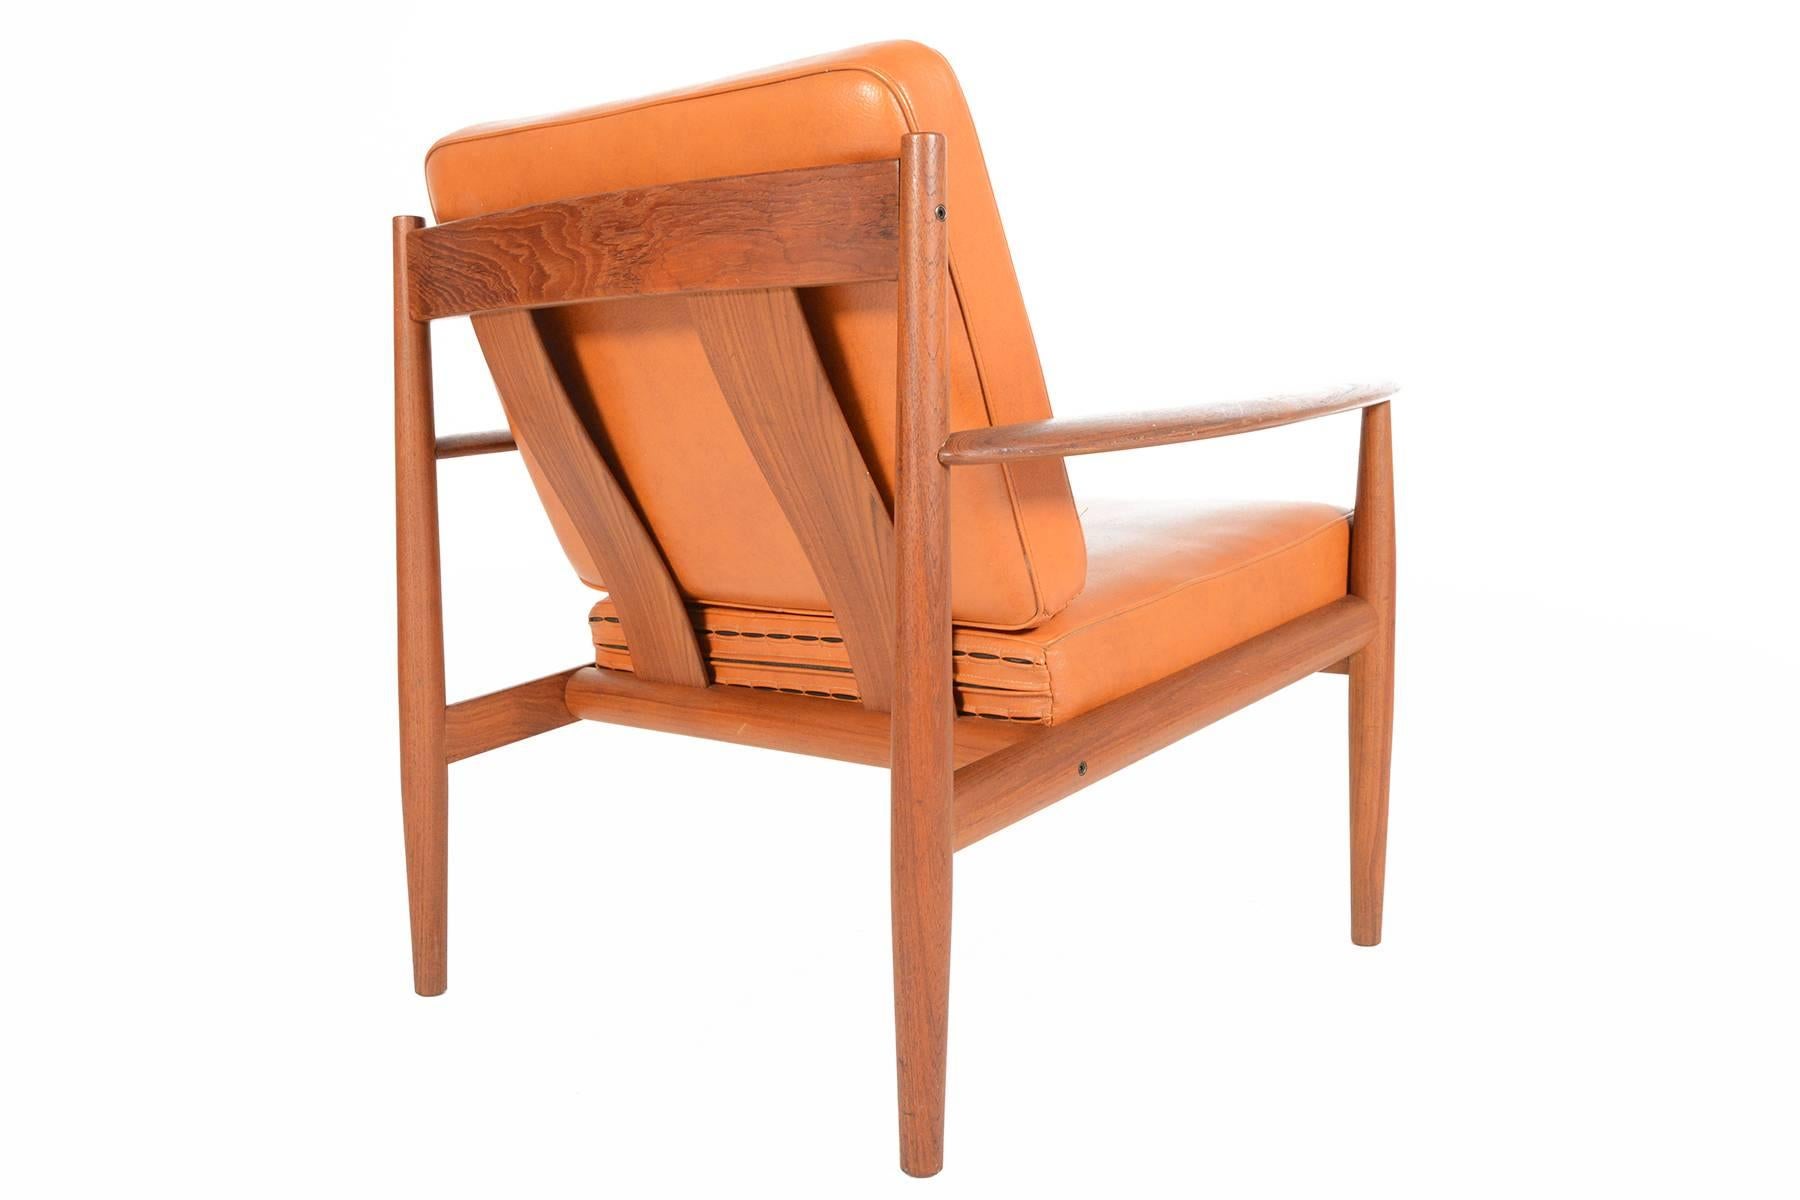 Mid-20th Century Pair of Grete Jalk Lounge Chairs in Teak